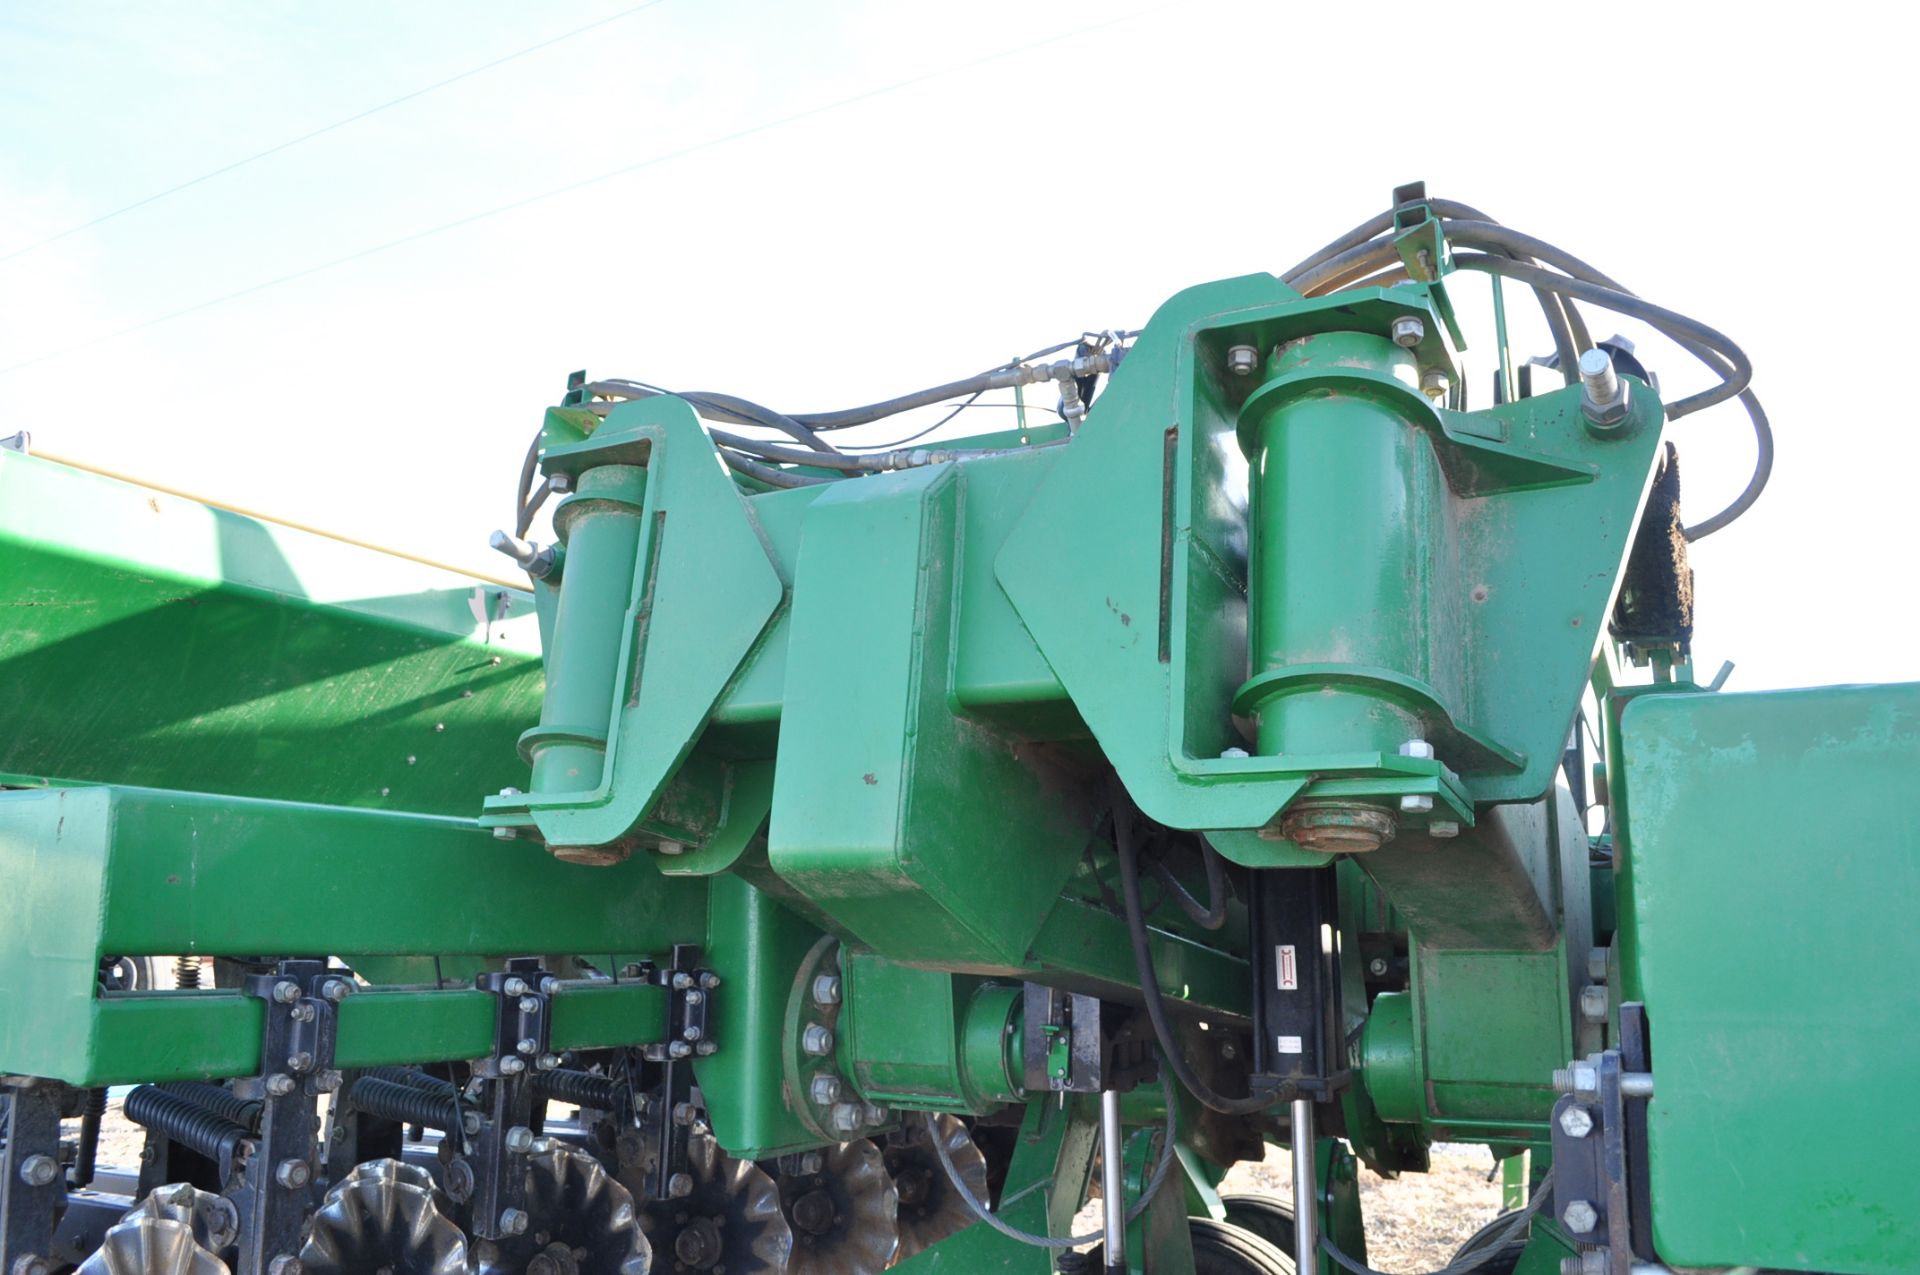 24’ Great Plains Solid Stand 2410NT drill, no-till coulters, seed loc wheel, single rubber press - Image 13 of 17